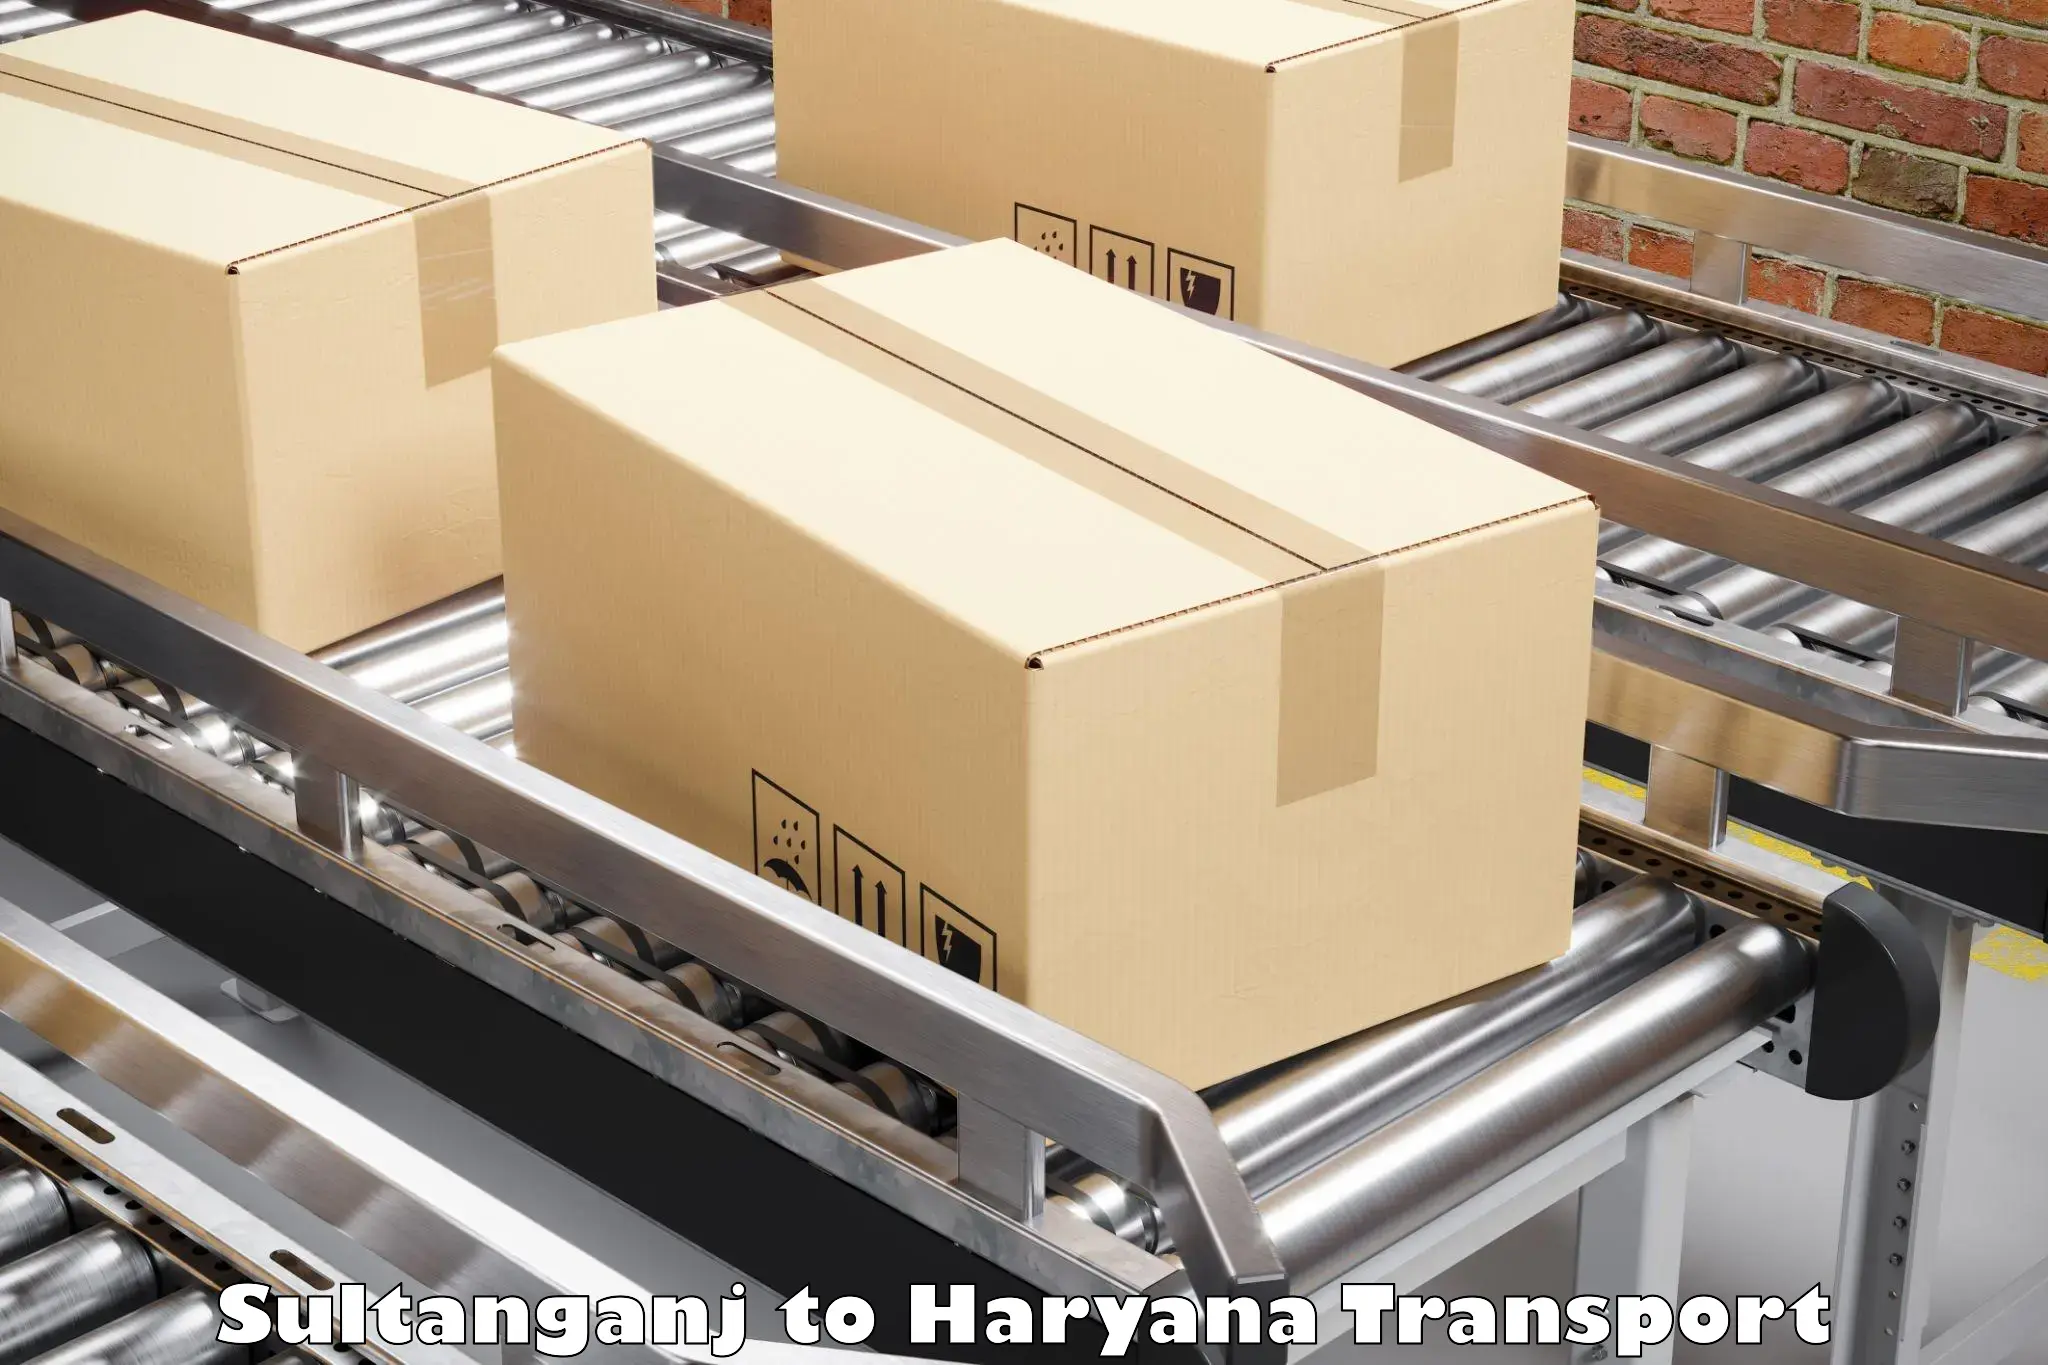 Container transport service Sultanganj to Narwana